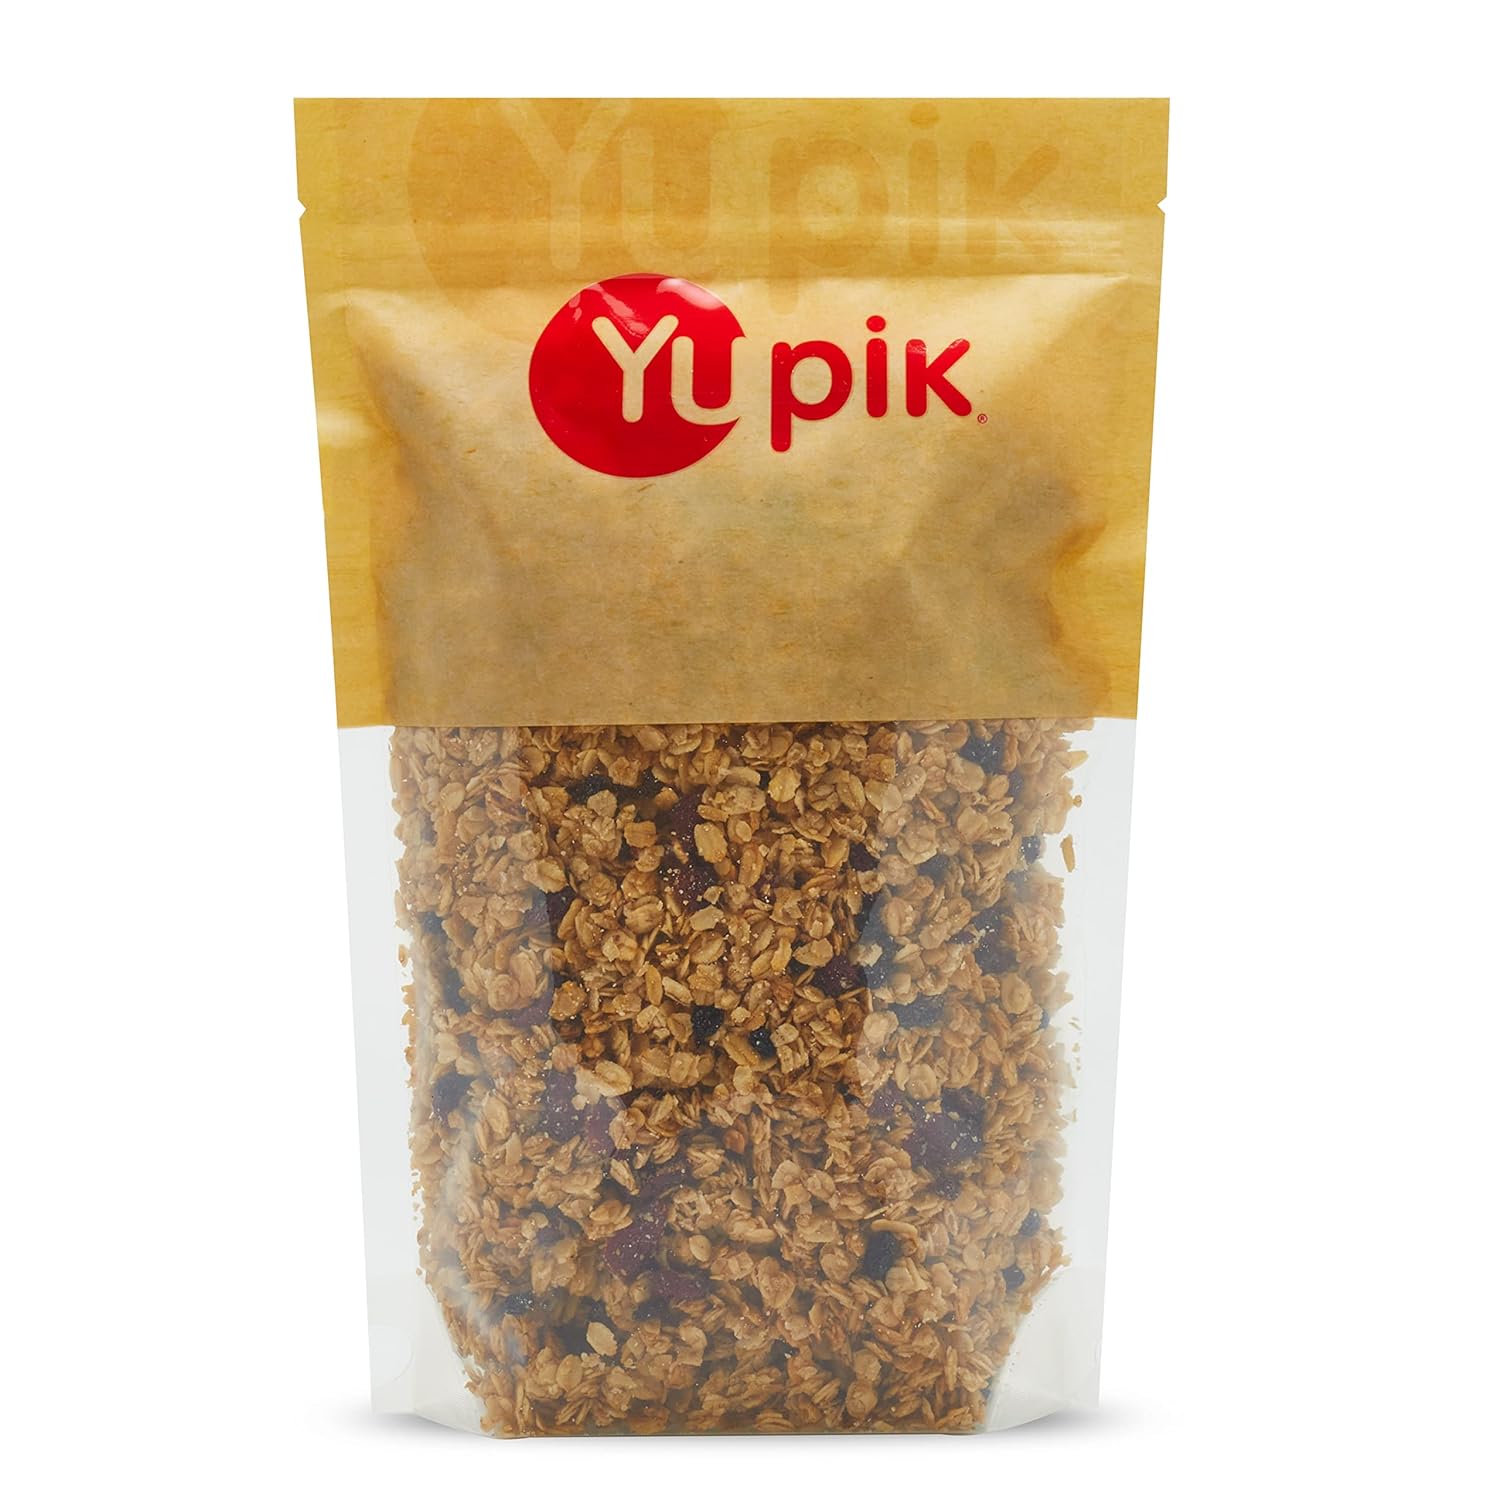 Yupik Granola Cereal, Chunky Berry Patch, 2.2 lb, a granola mix of oats, currants, cranberries, and honey